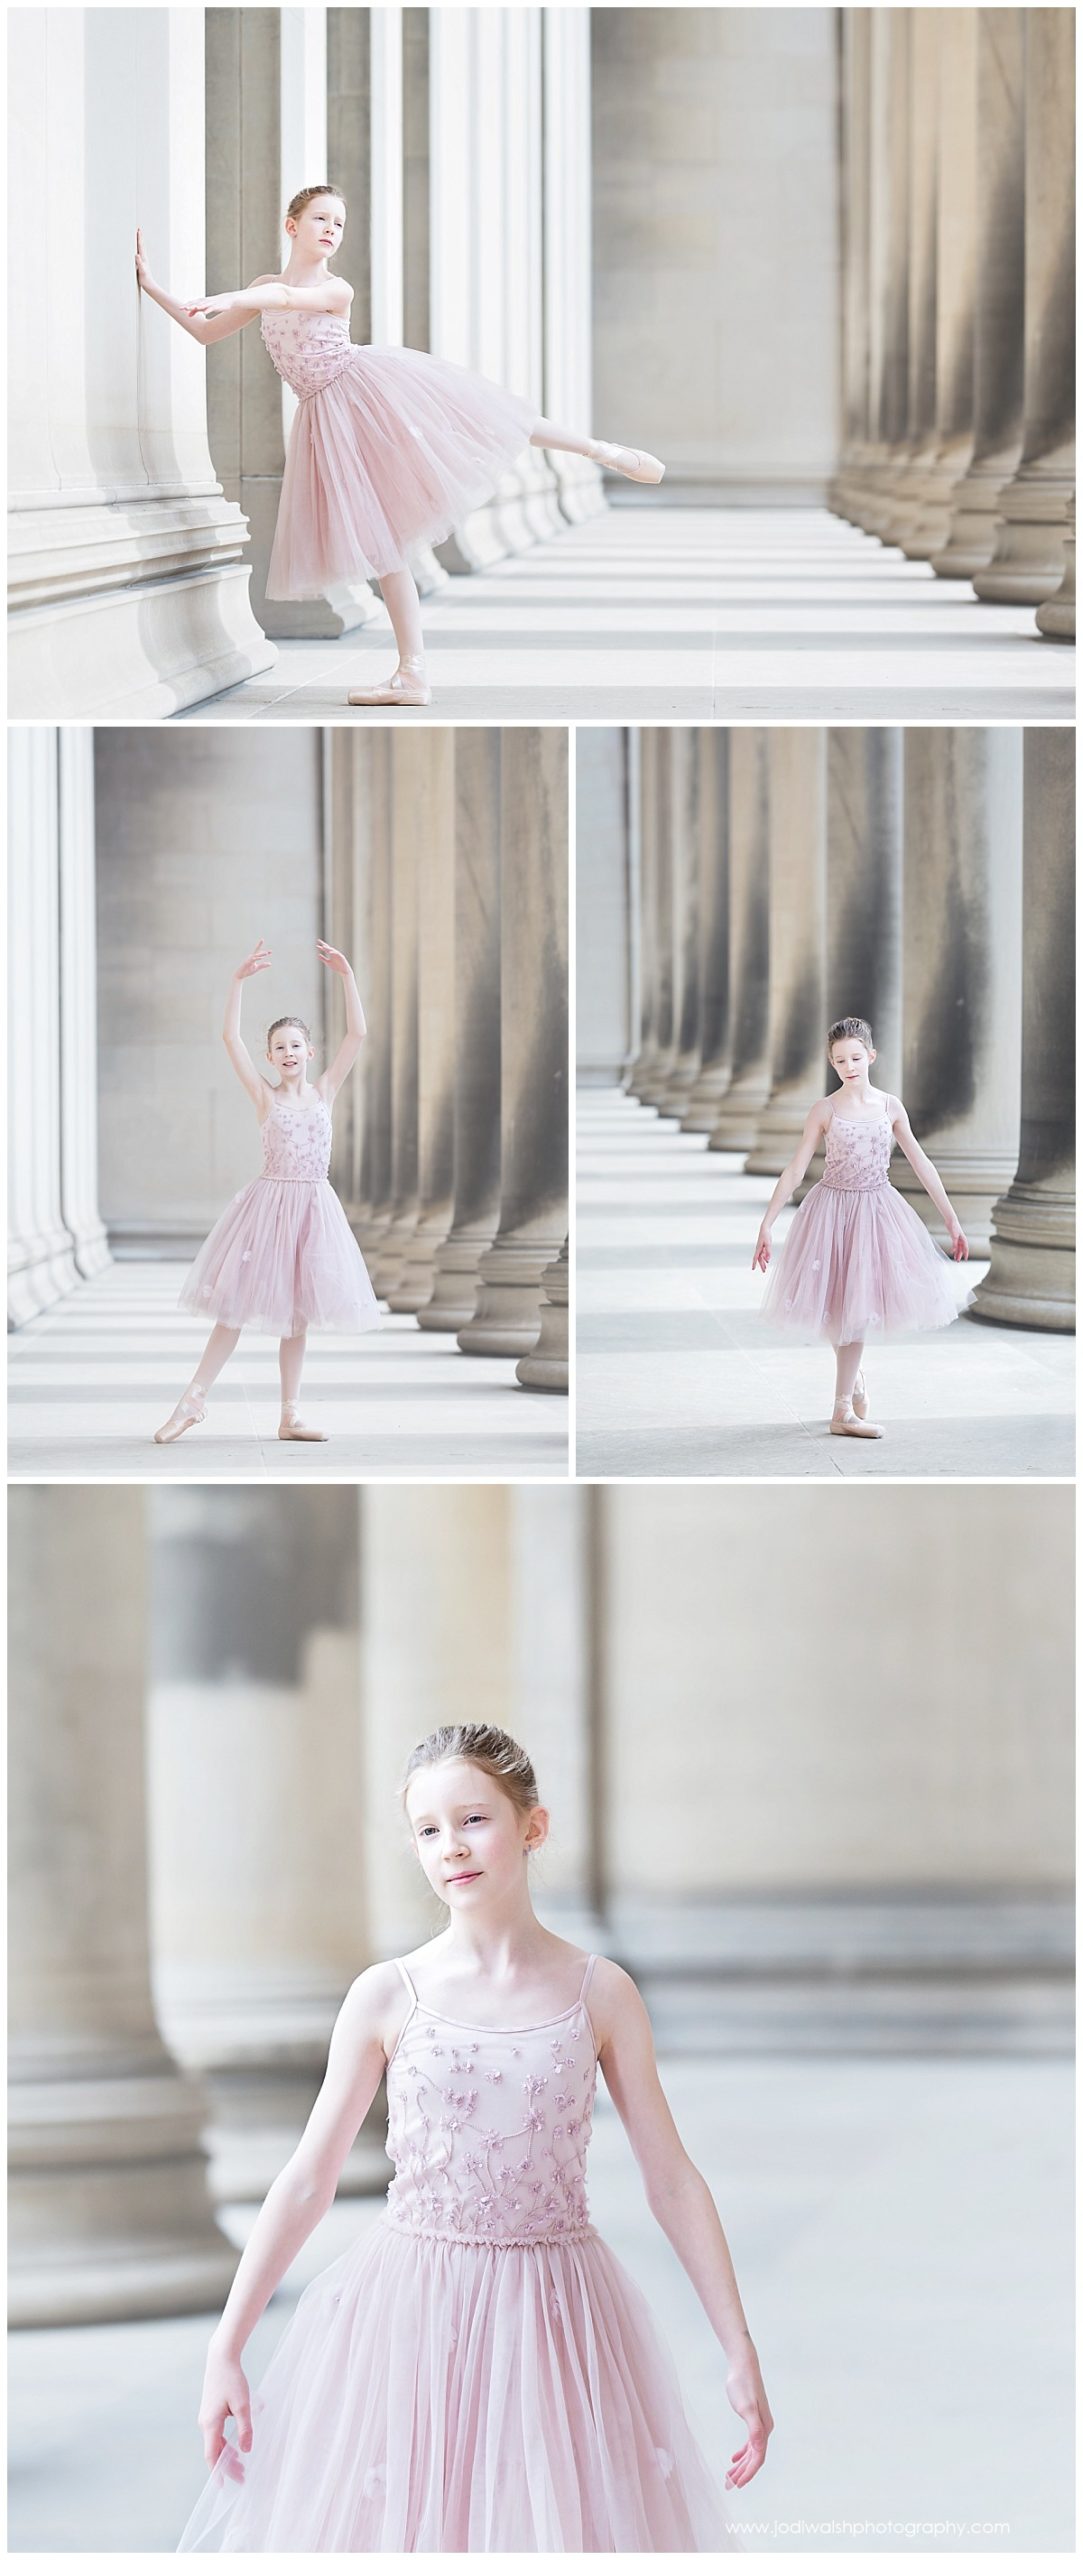 this collage of images show a tween ballerina in pink dress dancing in stone hallway in Pittsburgh